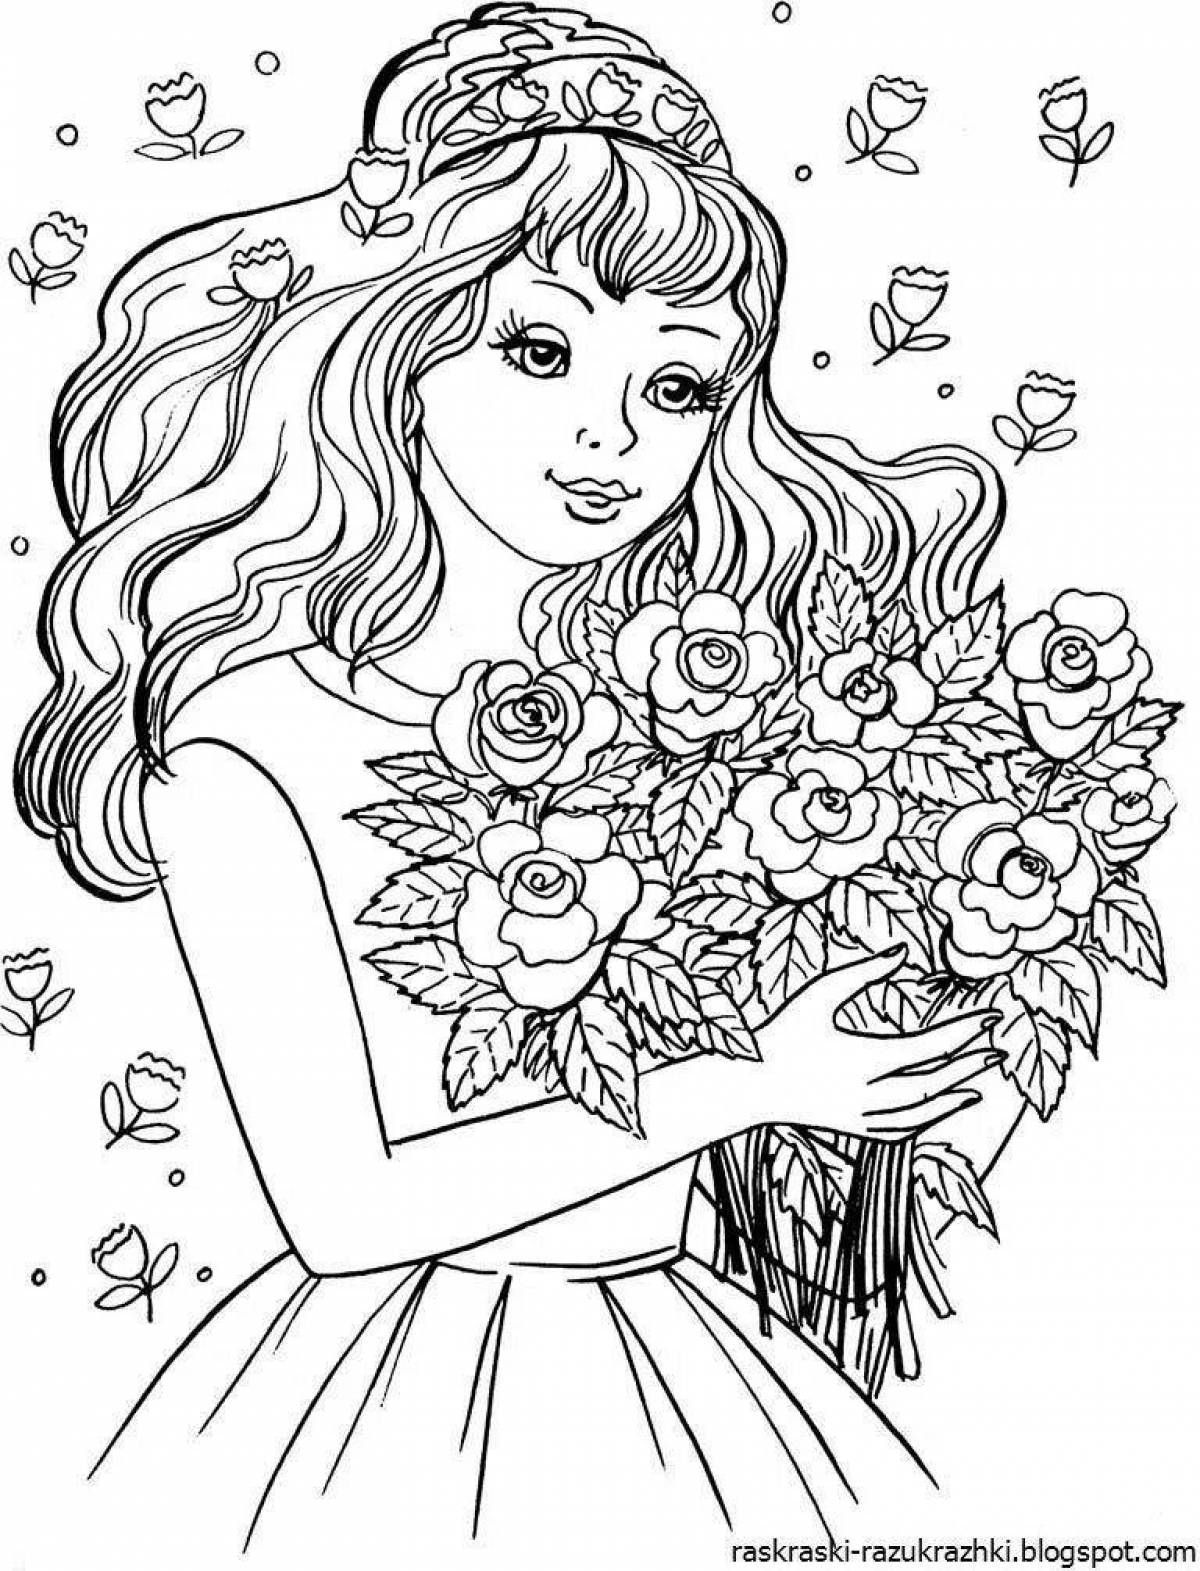 Joyful coloring for girls 9-10 years old